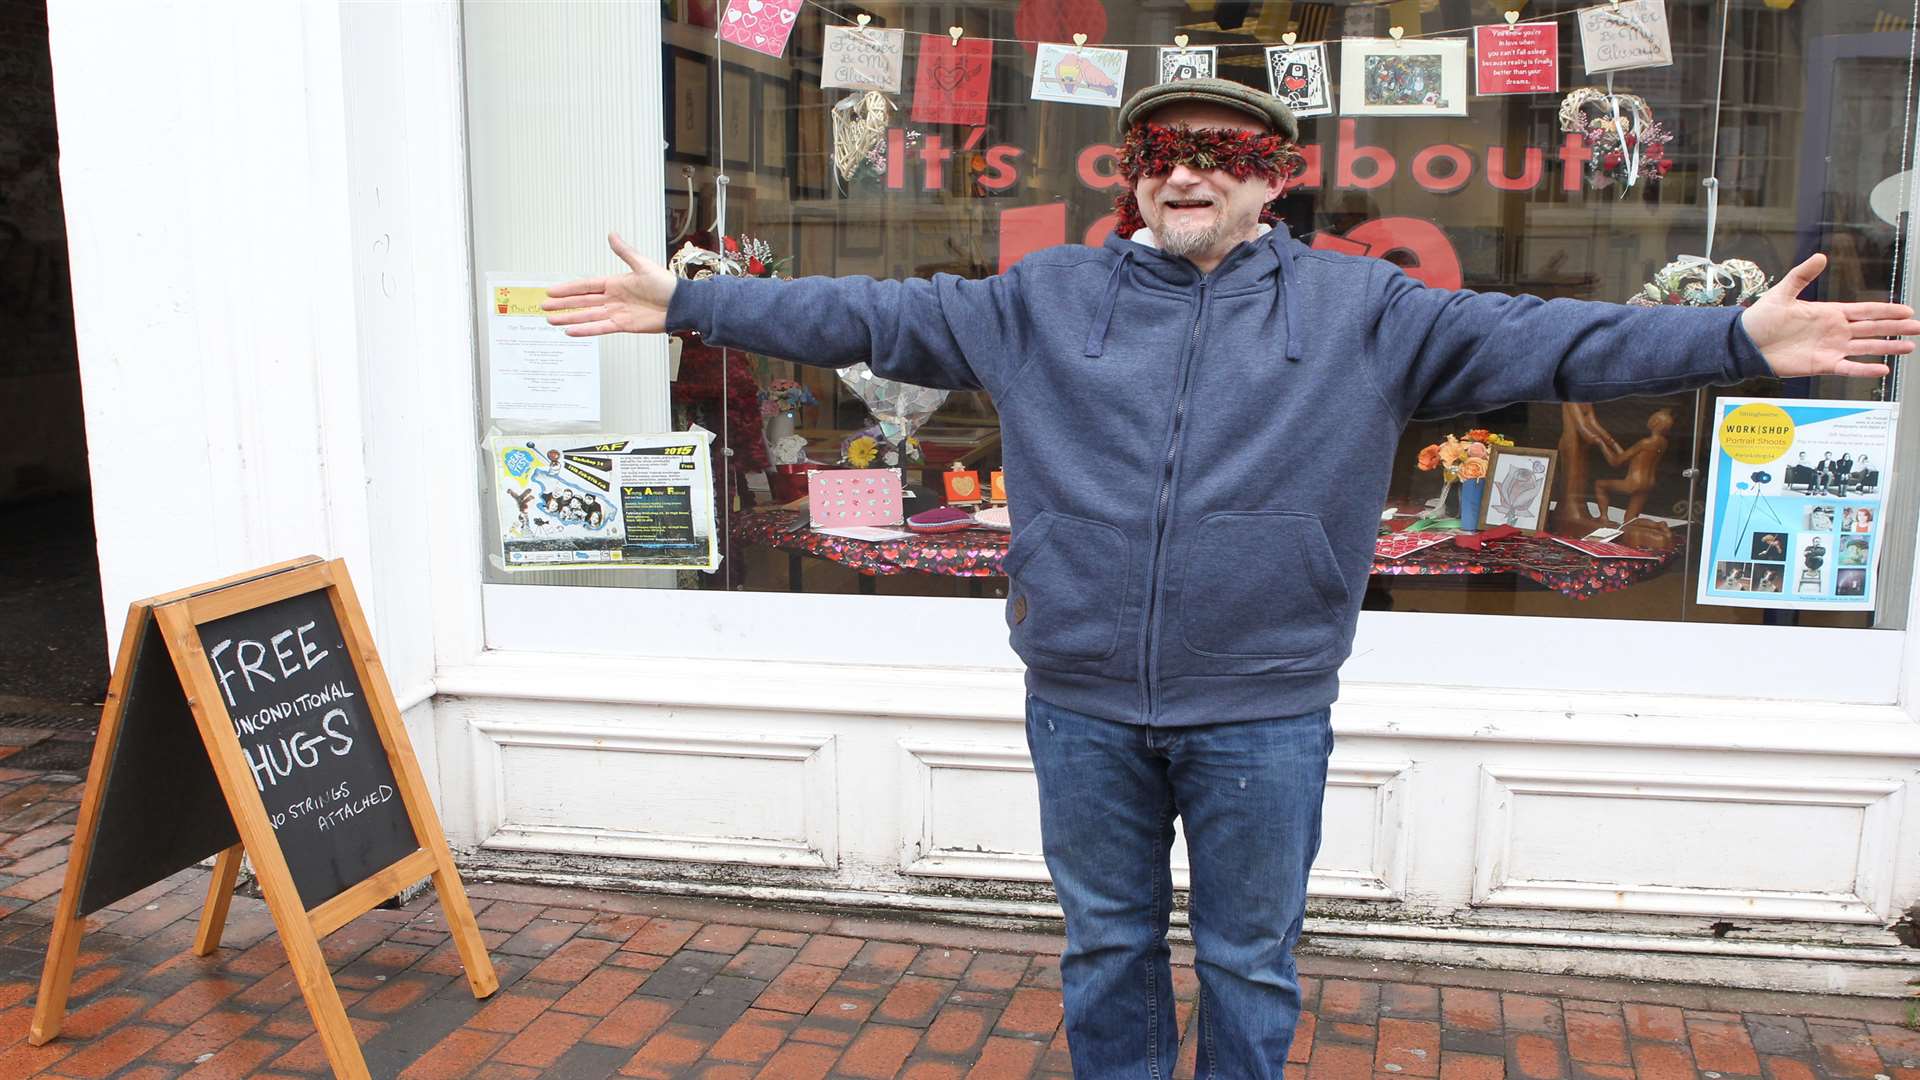 Artist Dean Tweedy performs a Valentine inspired "installation" where he offered free hugs to passerbys along Sittingbourne High Street